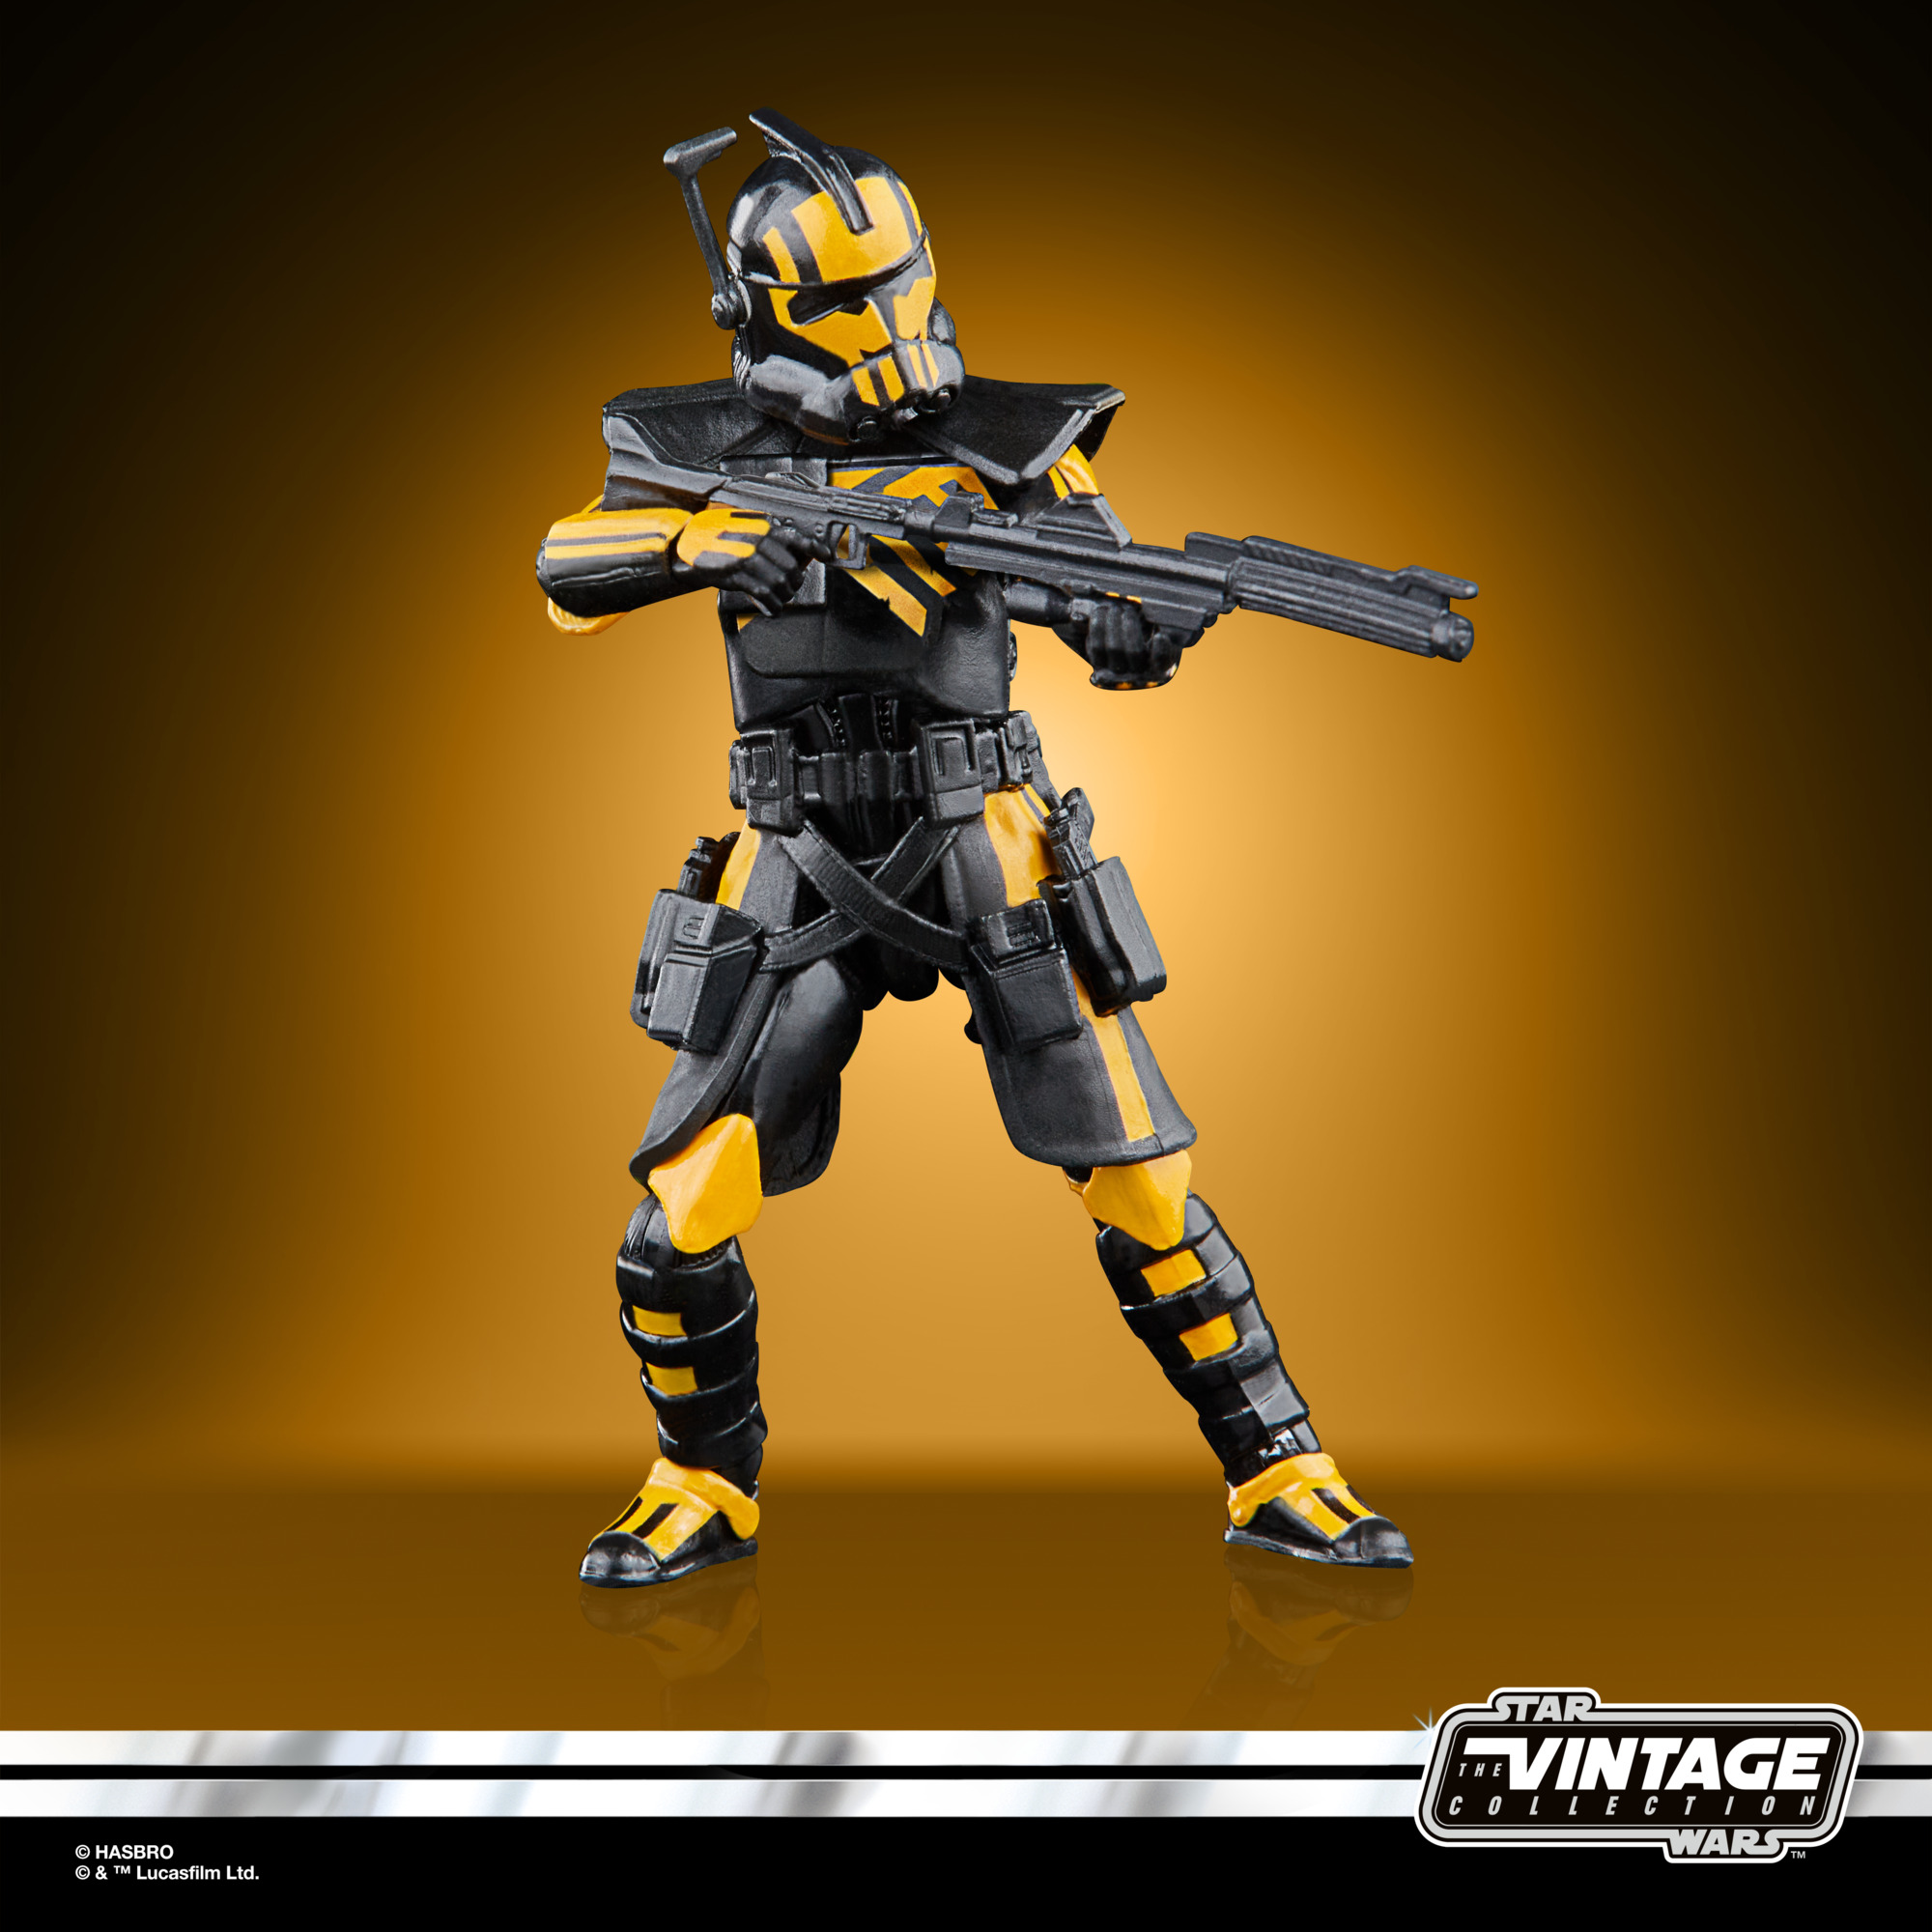 Star Wars The Vintage Collection Gaming Greats ARC Trooper (Umbra Operative) F62535L0 5010994151911